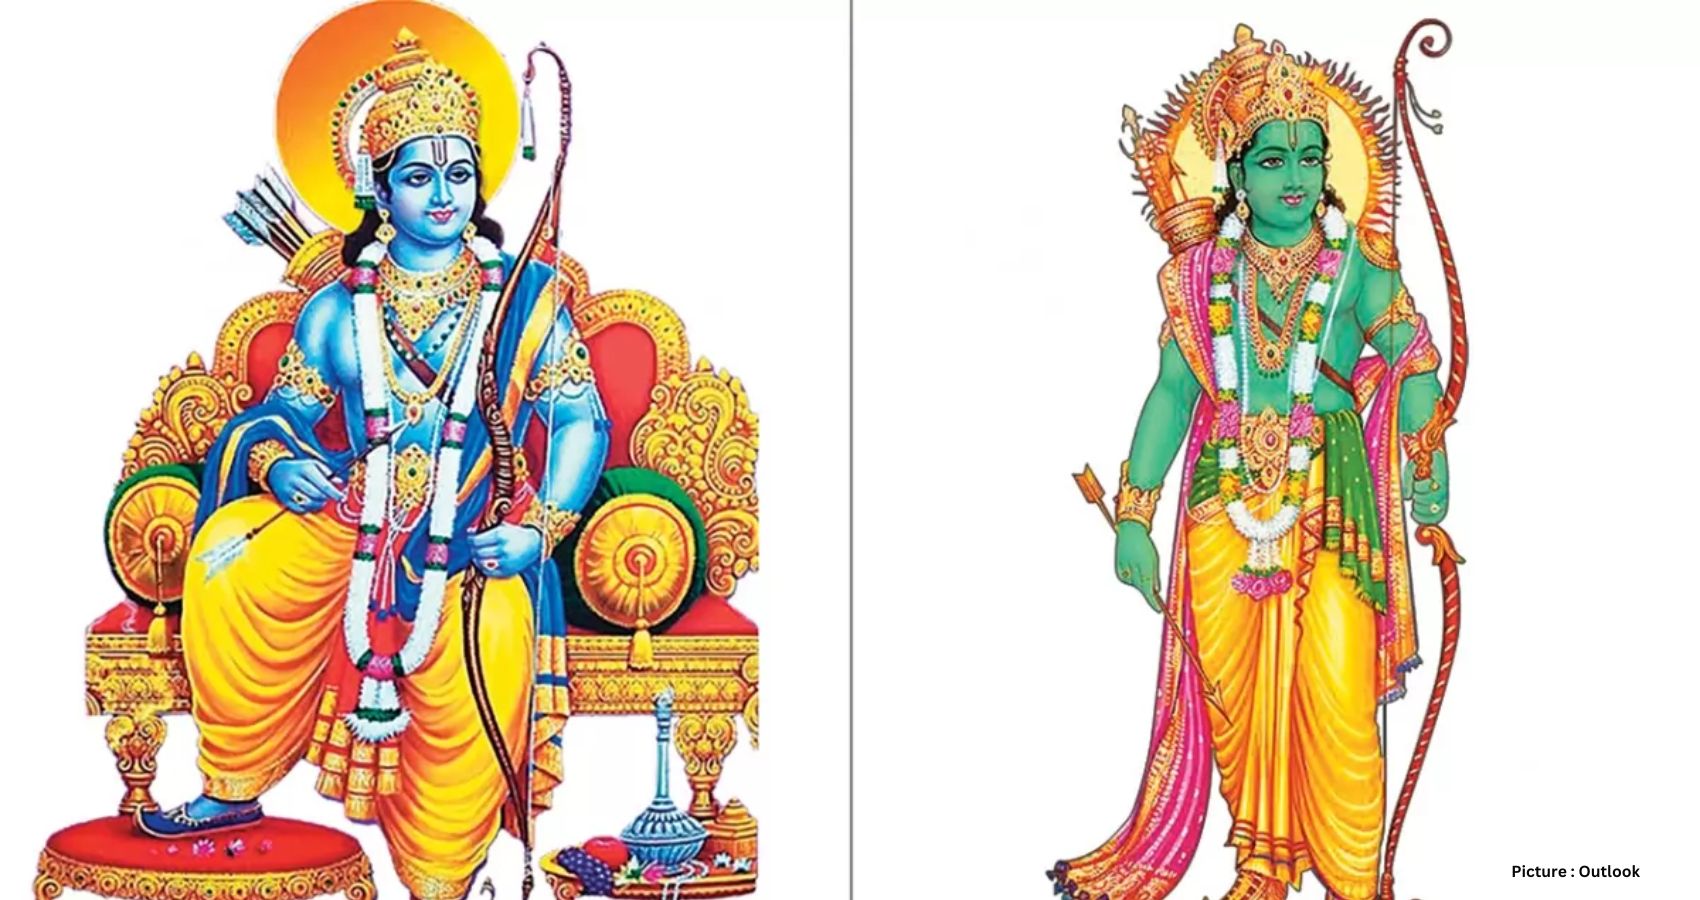 Featured & Cover   Shades of Divinity Debating the Complexion of Lord Ram in Contemporary Politics